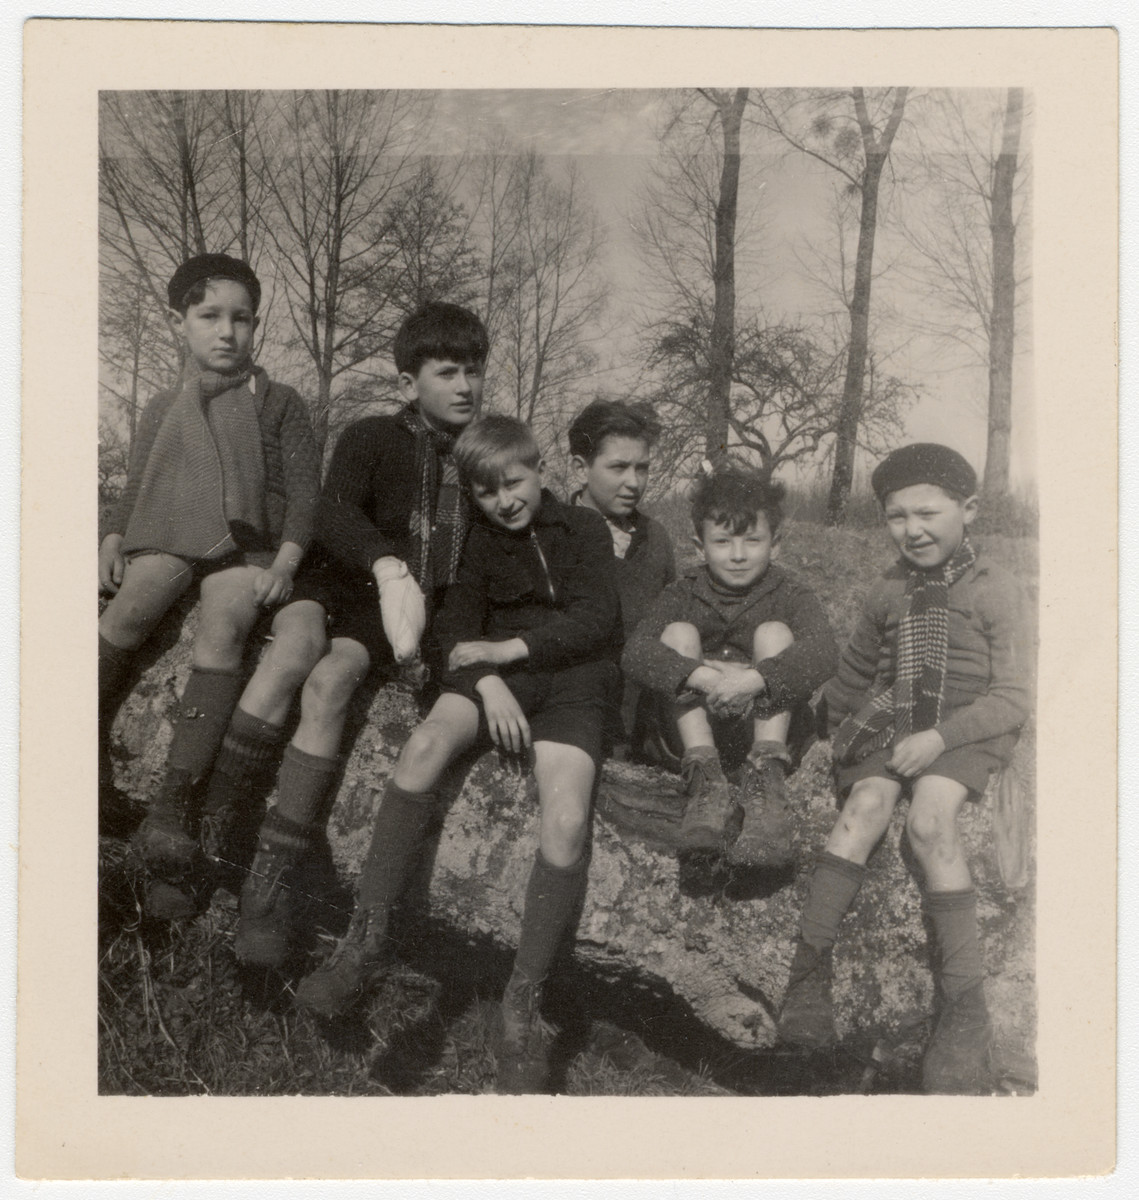 A group of Jewish children evacuated from Paris by the Quakers, outside of the Quaker boarding home, Moulin de la Ferriere, in Noce, Normandy, in early 1940. Steven Simon is the first one at left.